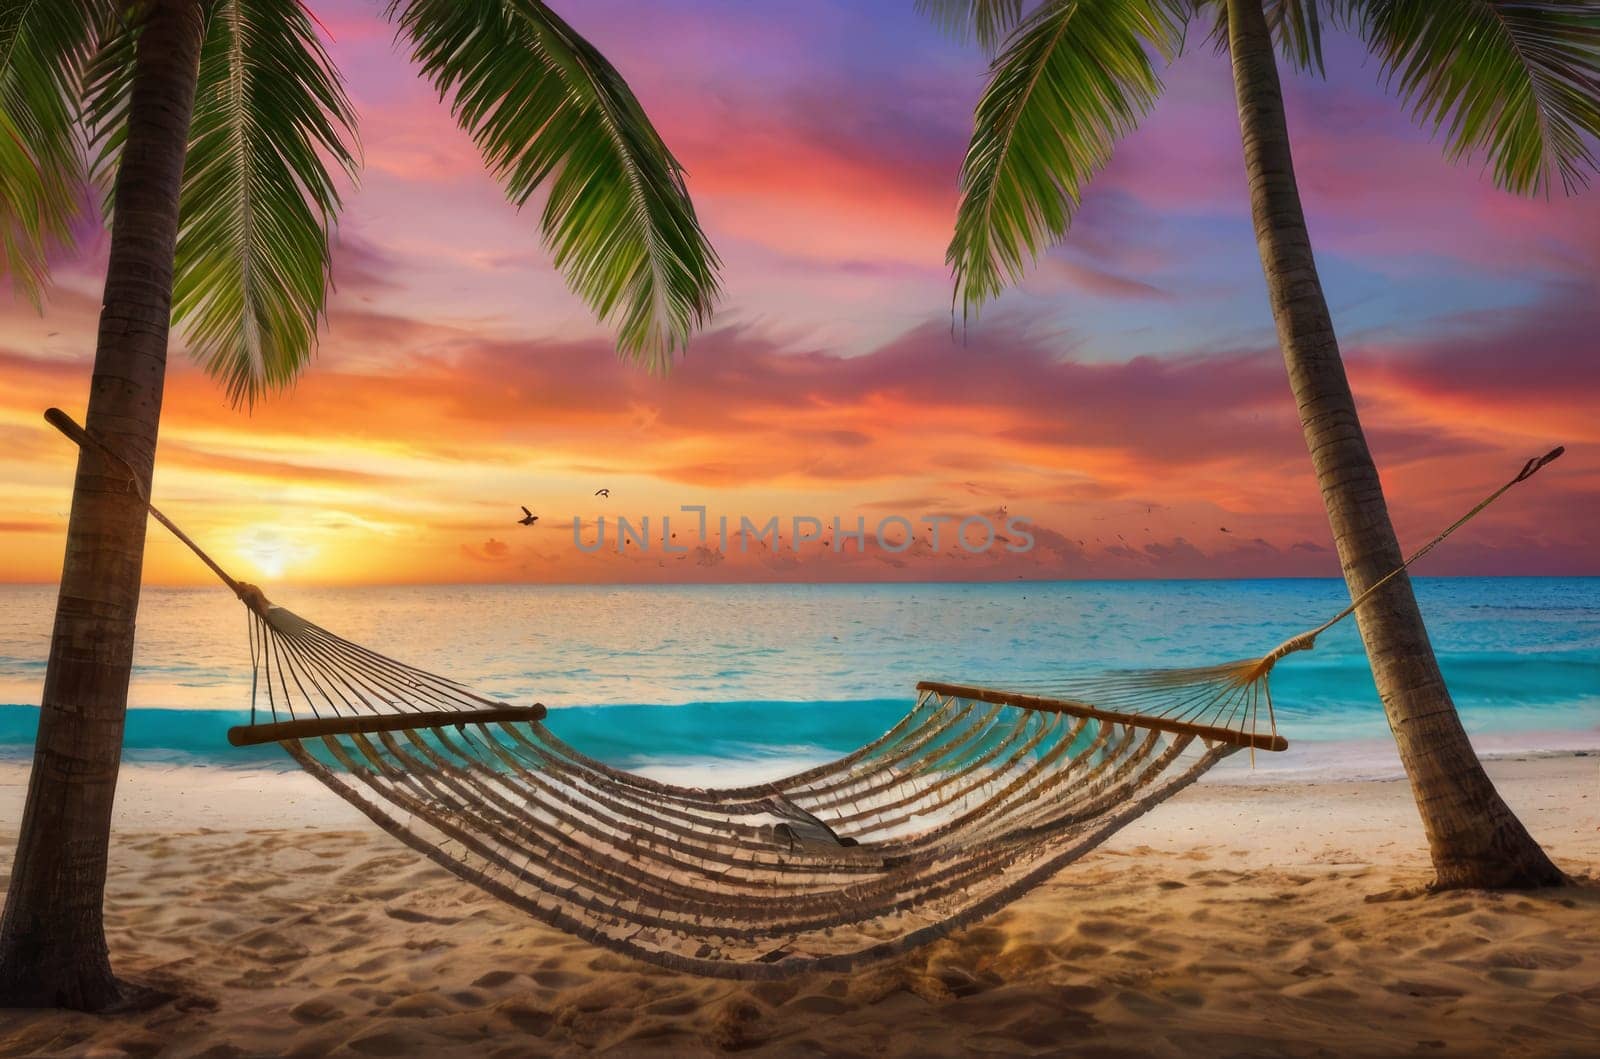 Tropical Getaway. Hammock Hanging Between Palm Trees on Secluded Beach at Sunset by Annu1tochka